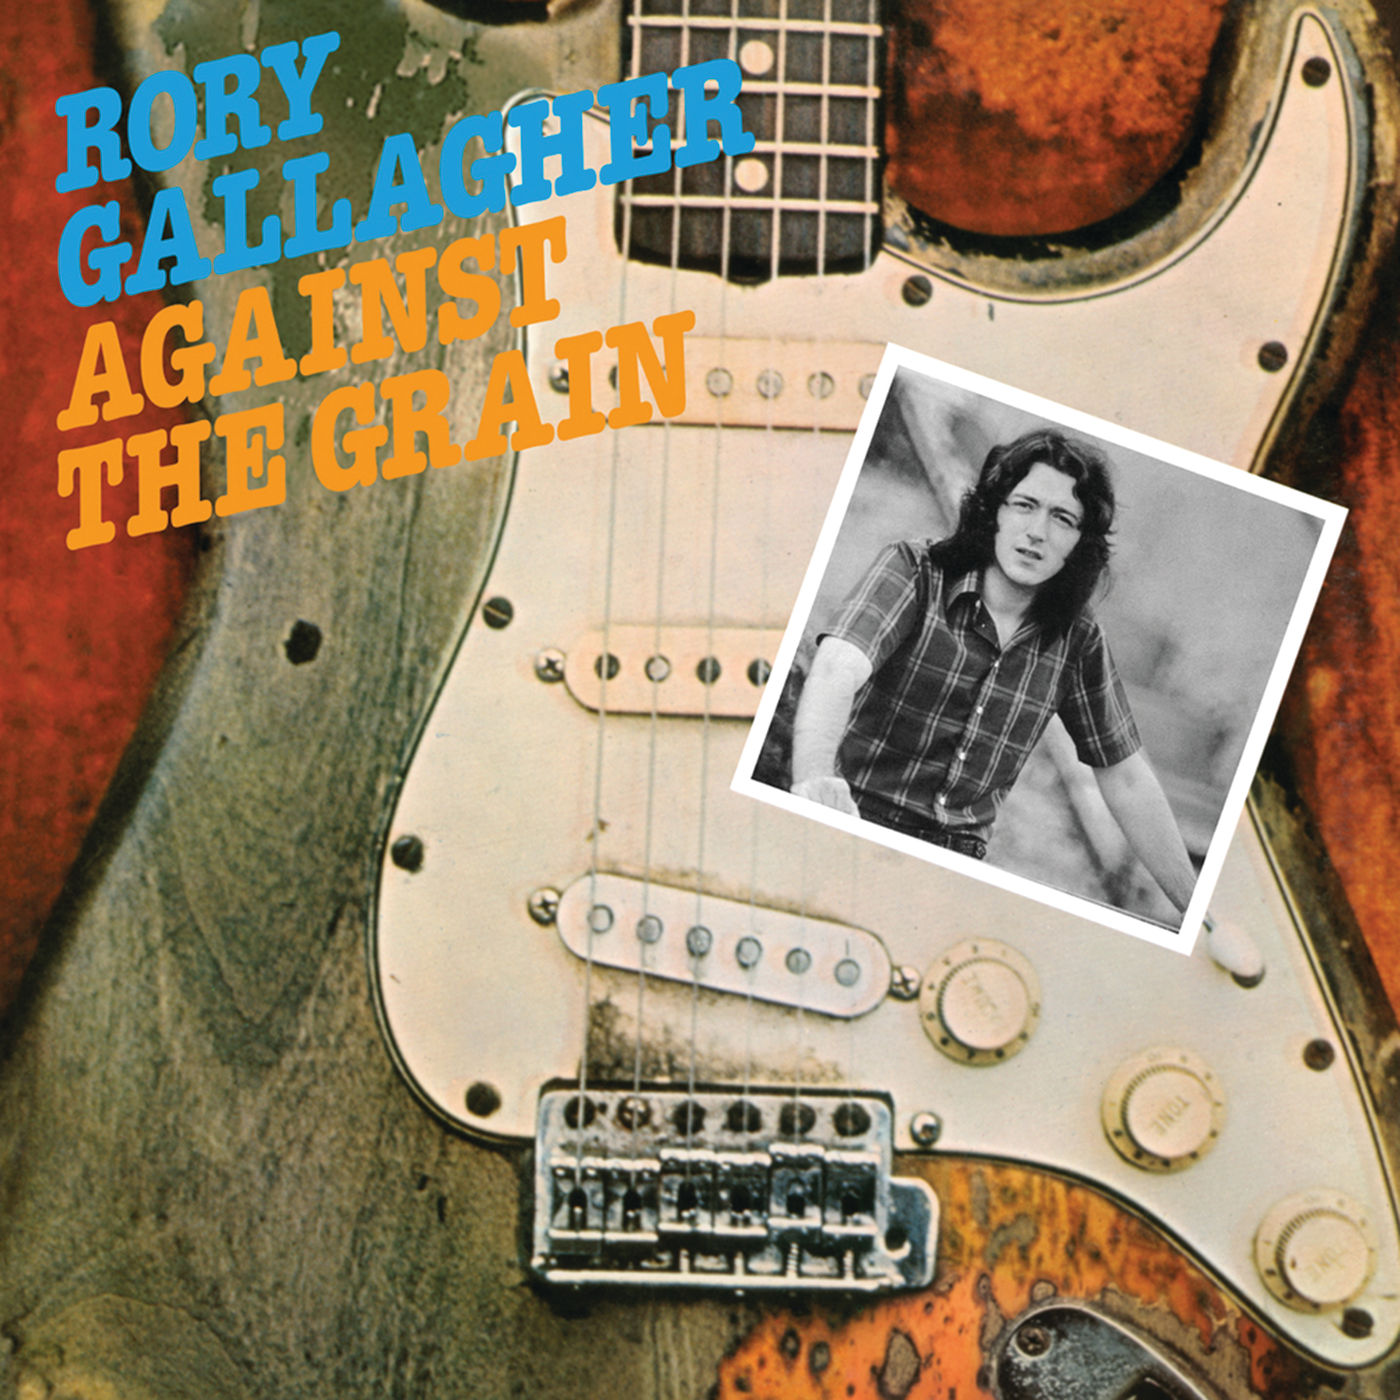 Rory Gallagher - Against The Grain (Remastered) (1975/2020) [FLAC 24bit/96kHz]